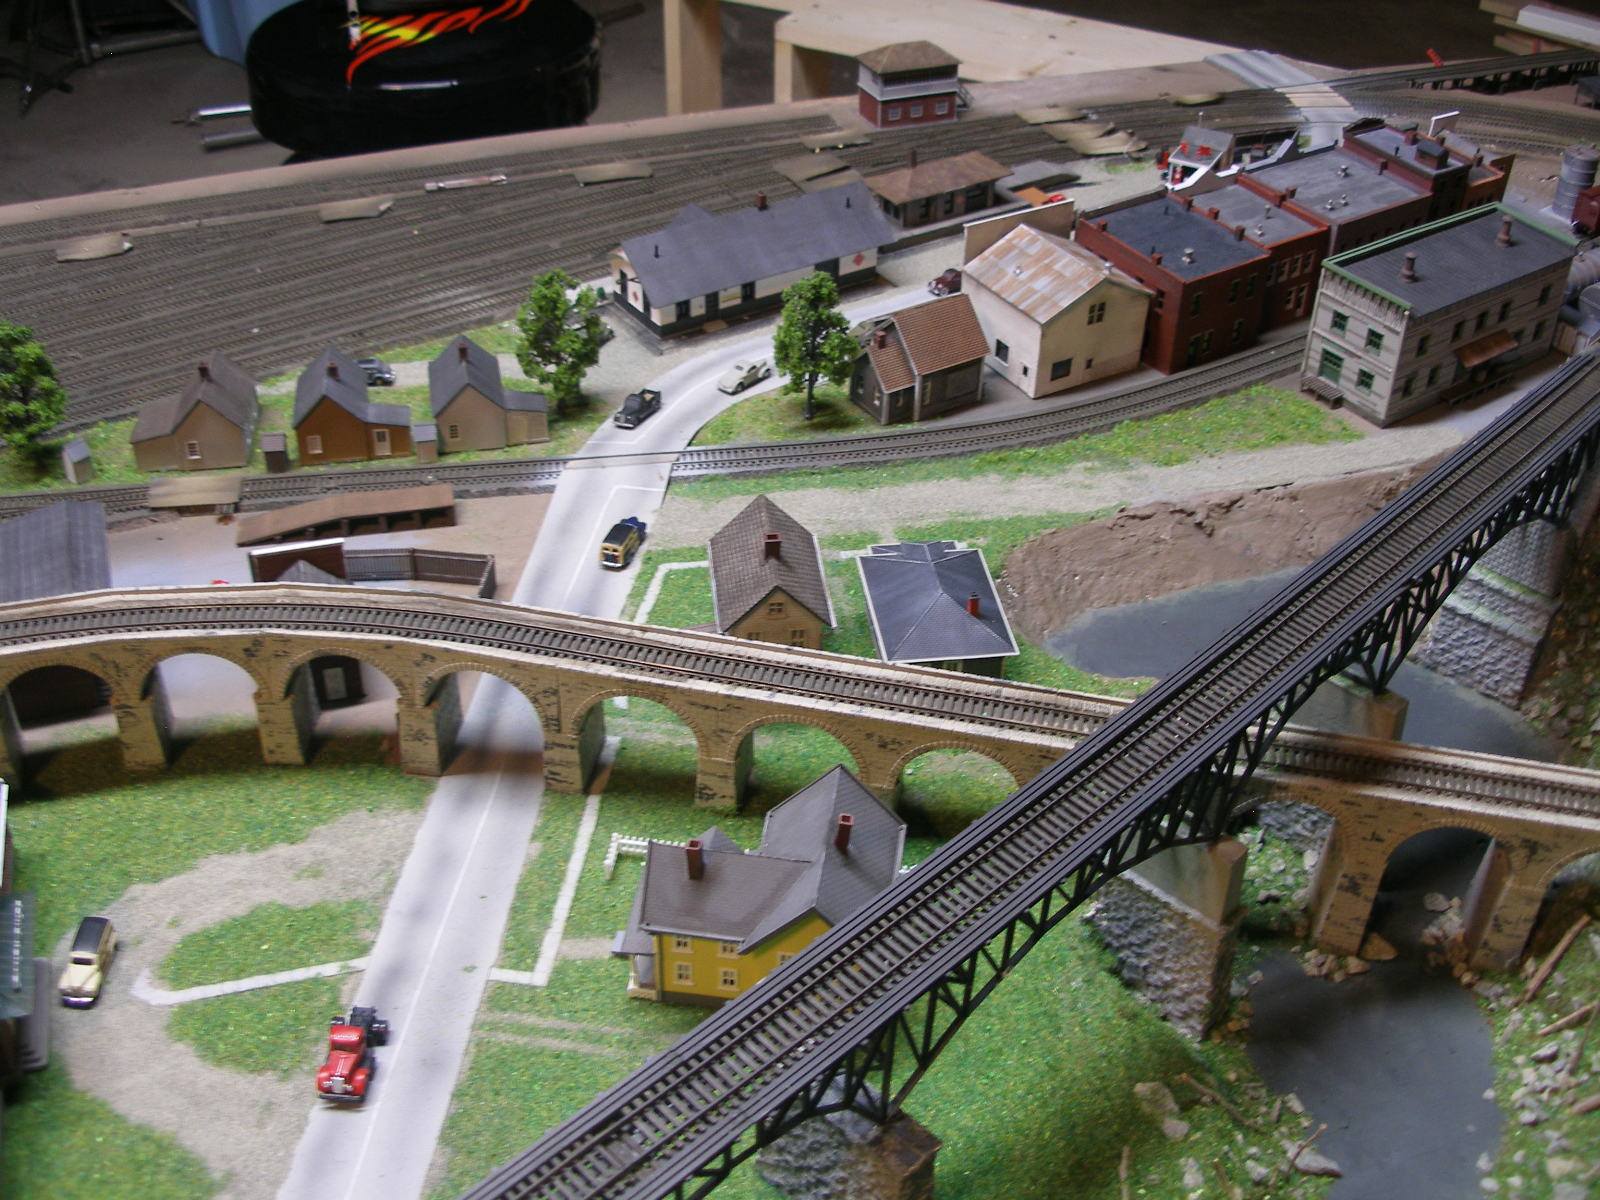  is a cool concept and increasing the beauty of the model train layout